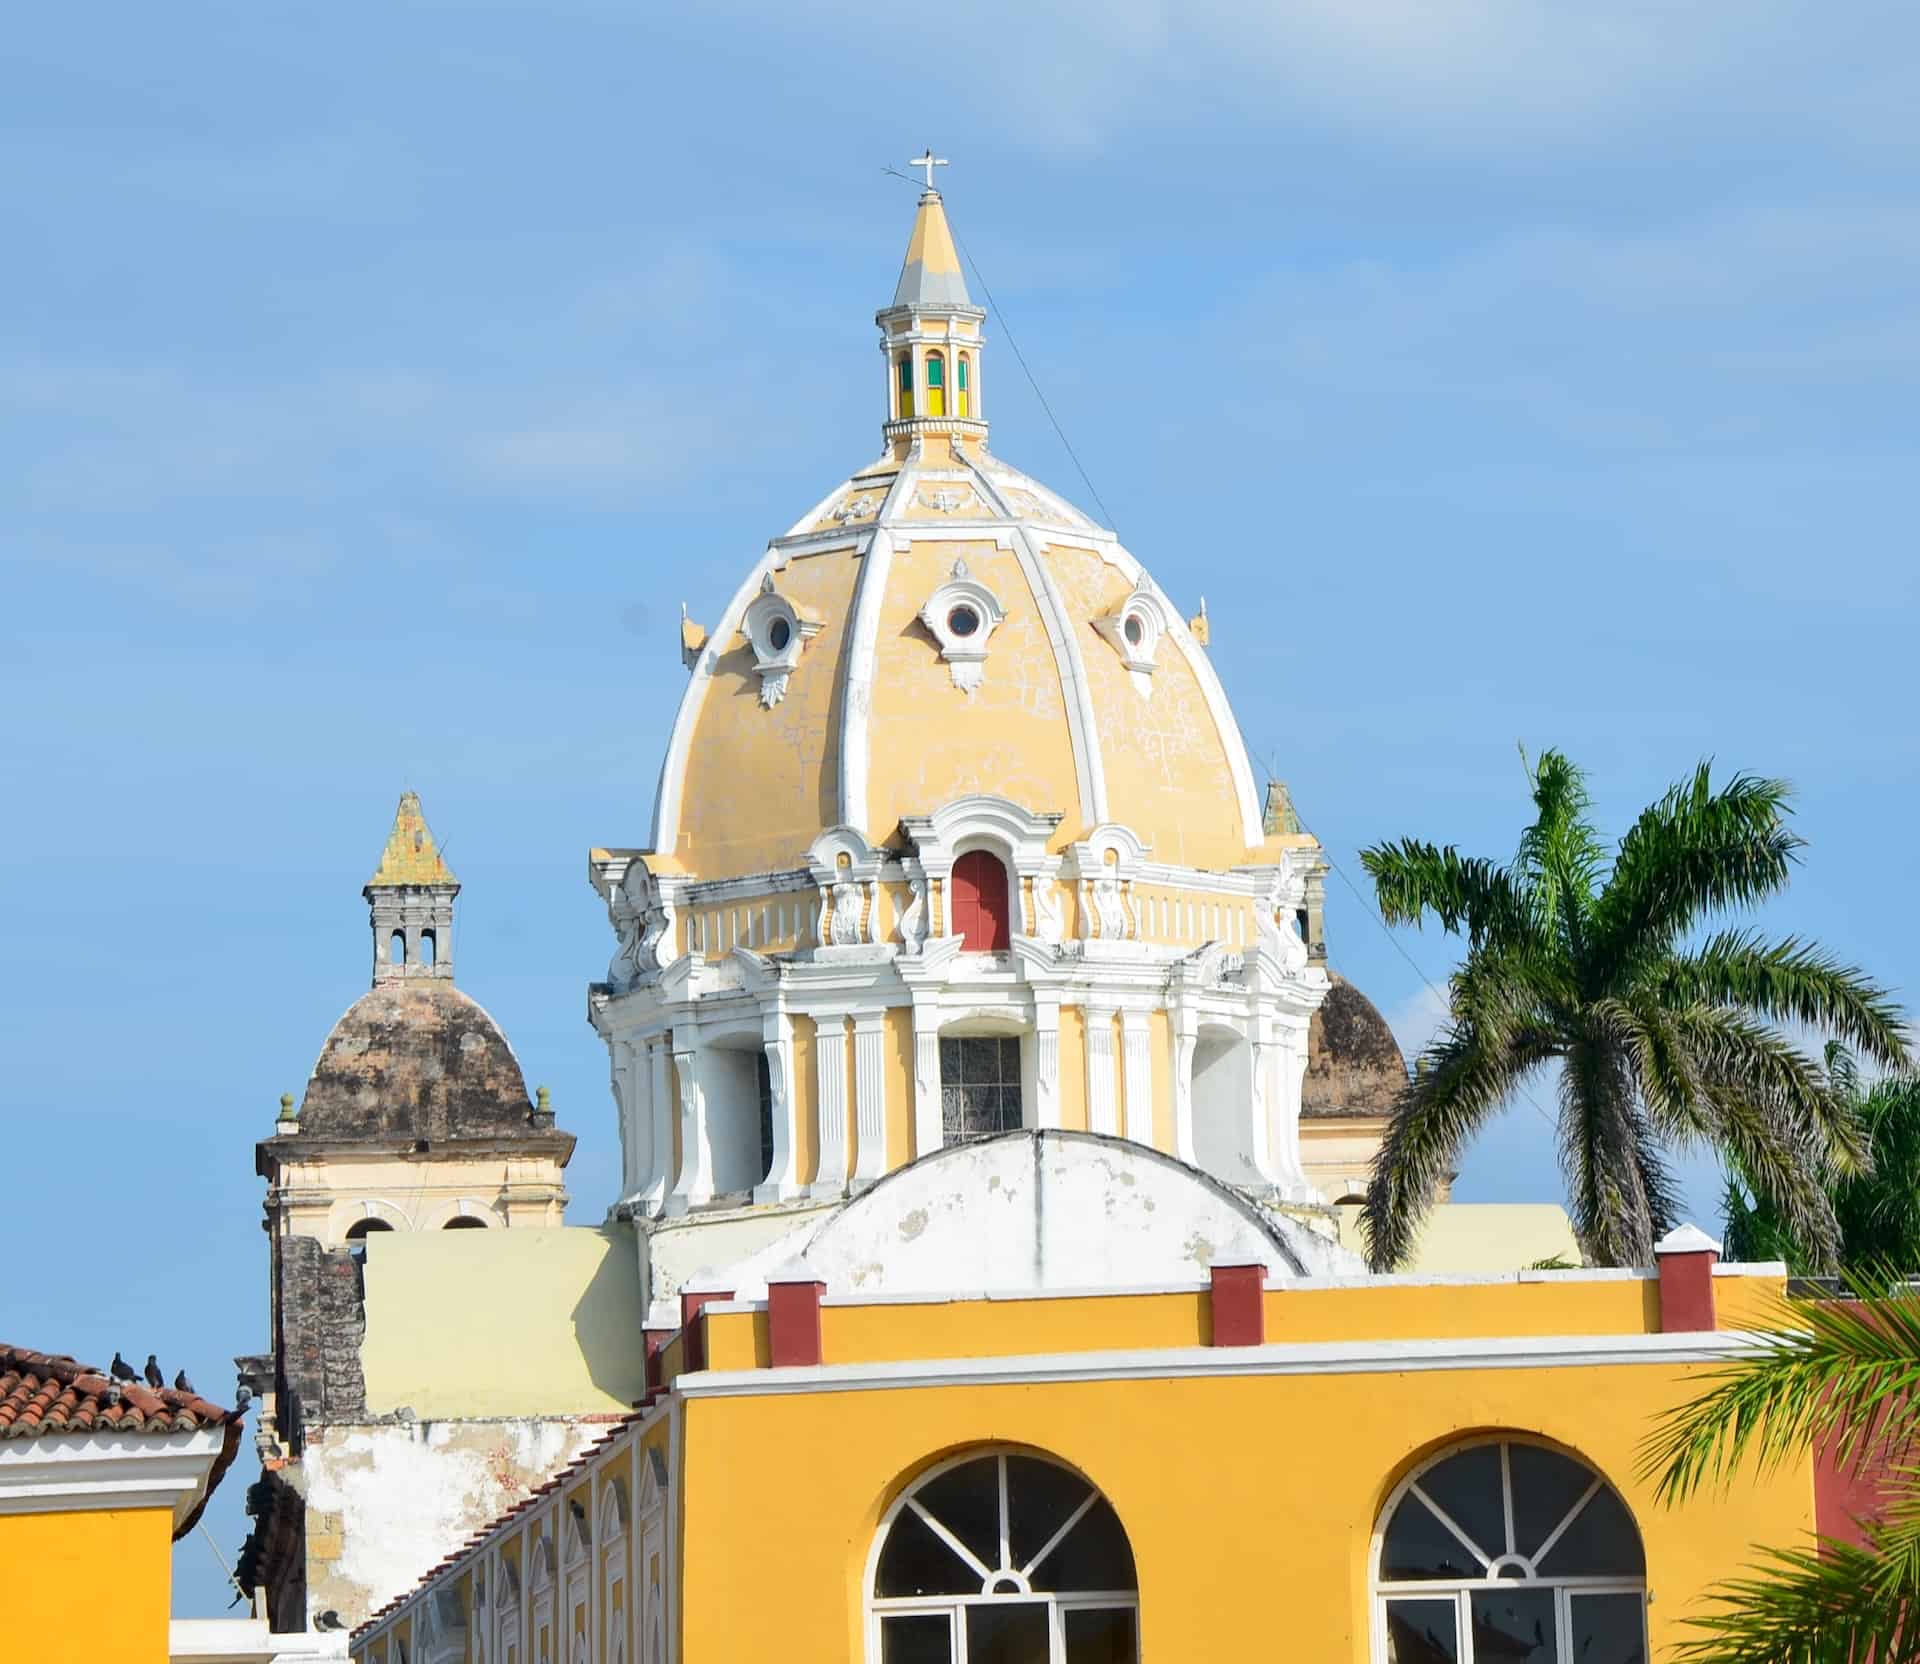 Dome of the Church of San Pedro Claver in Cartagena, Colombia